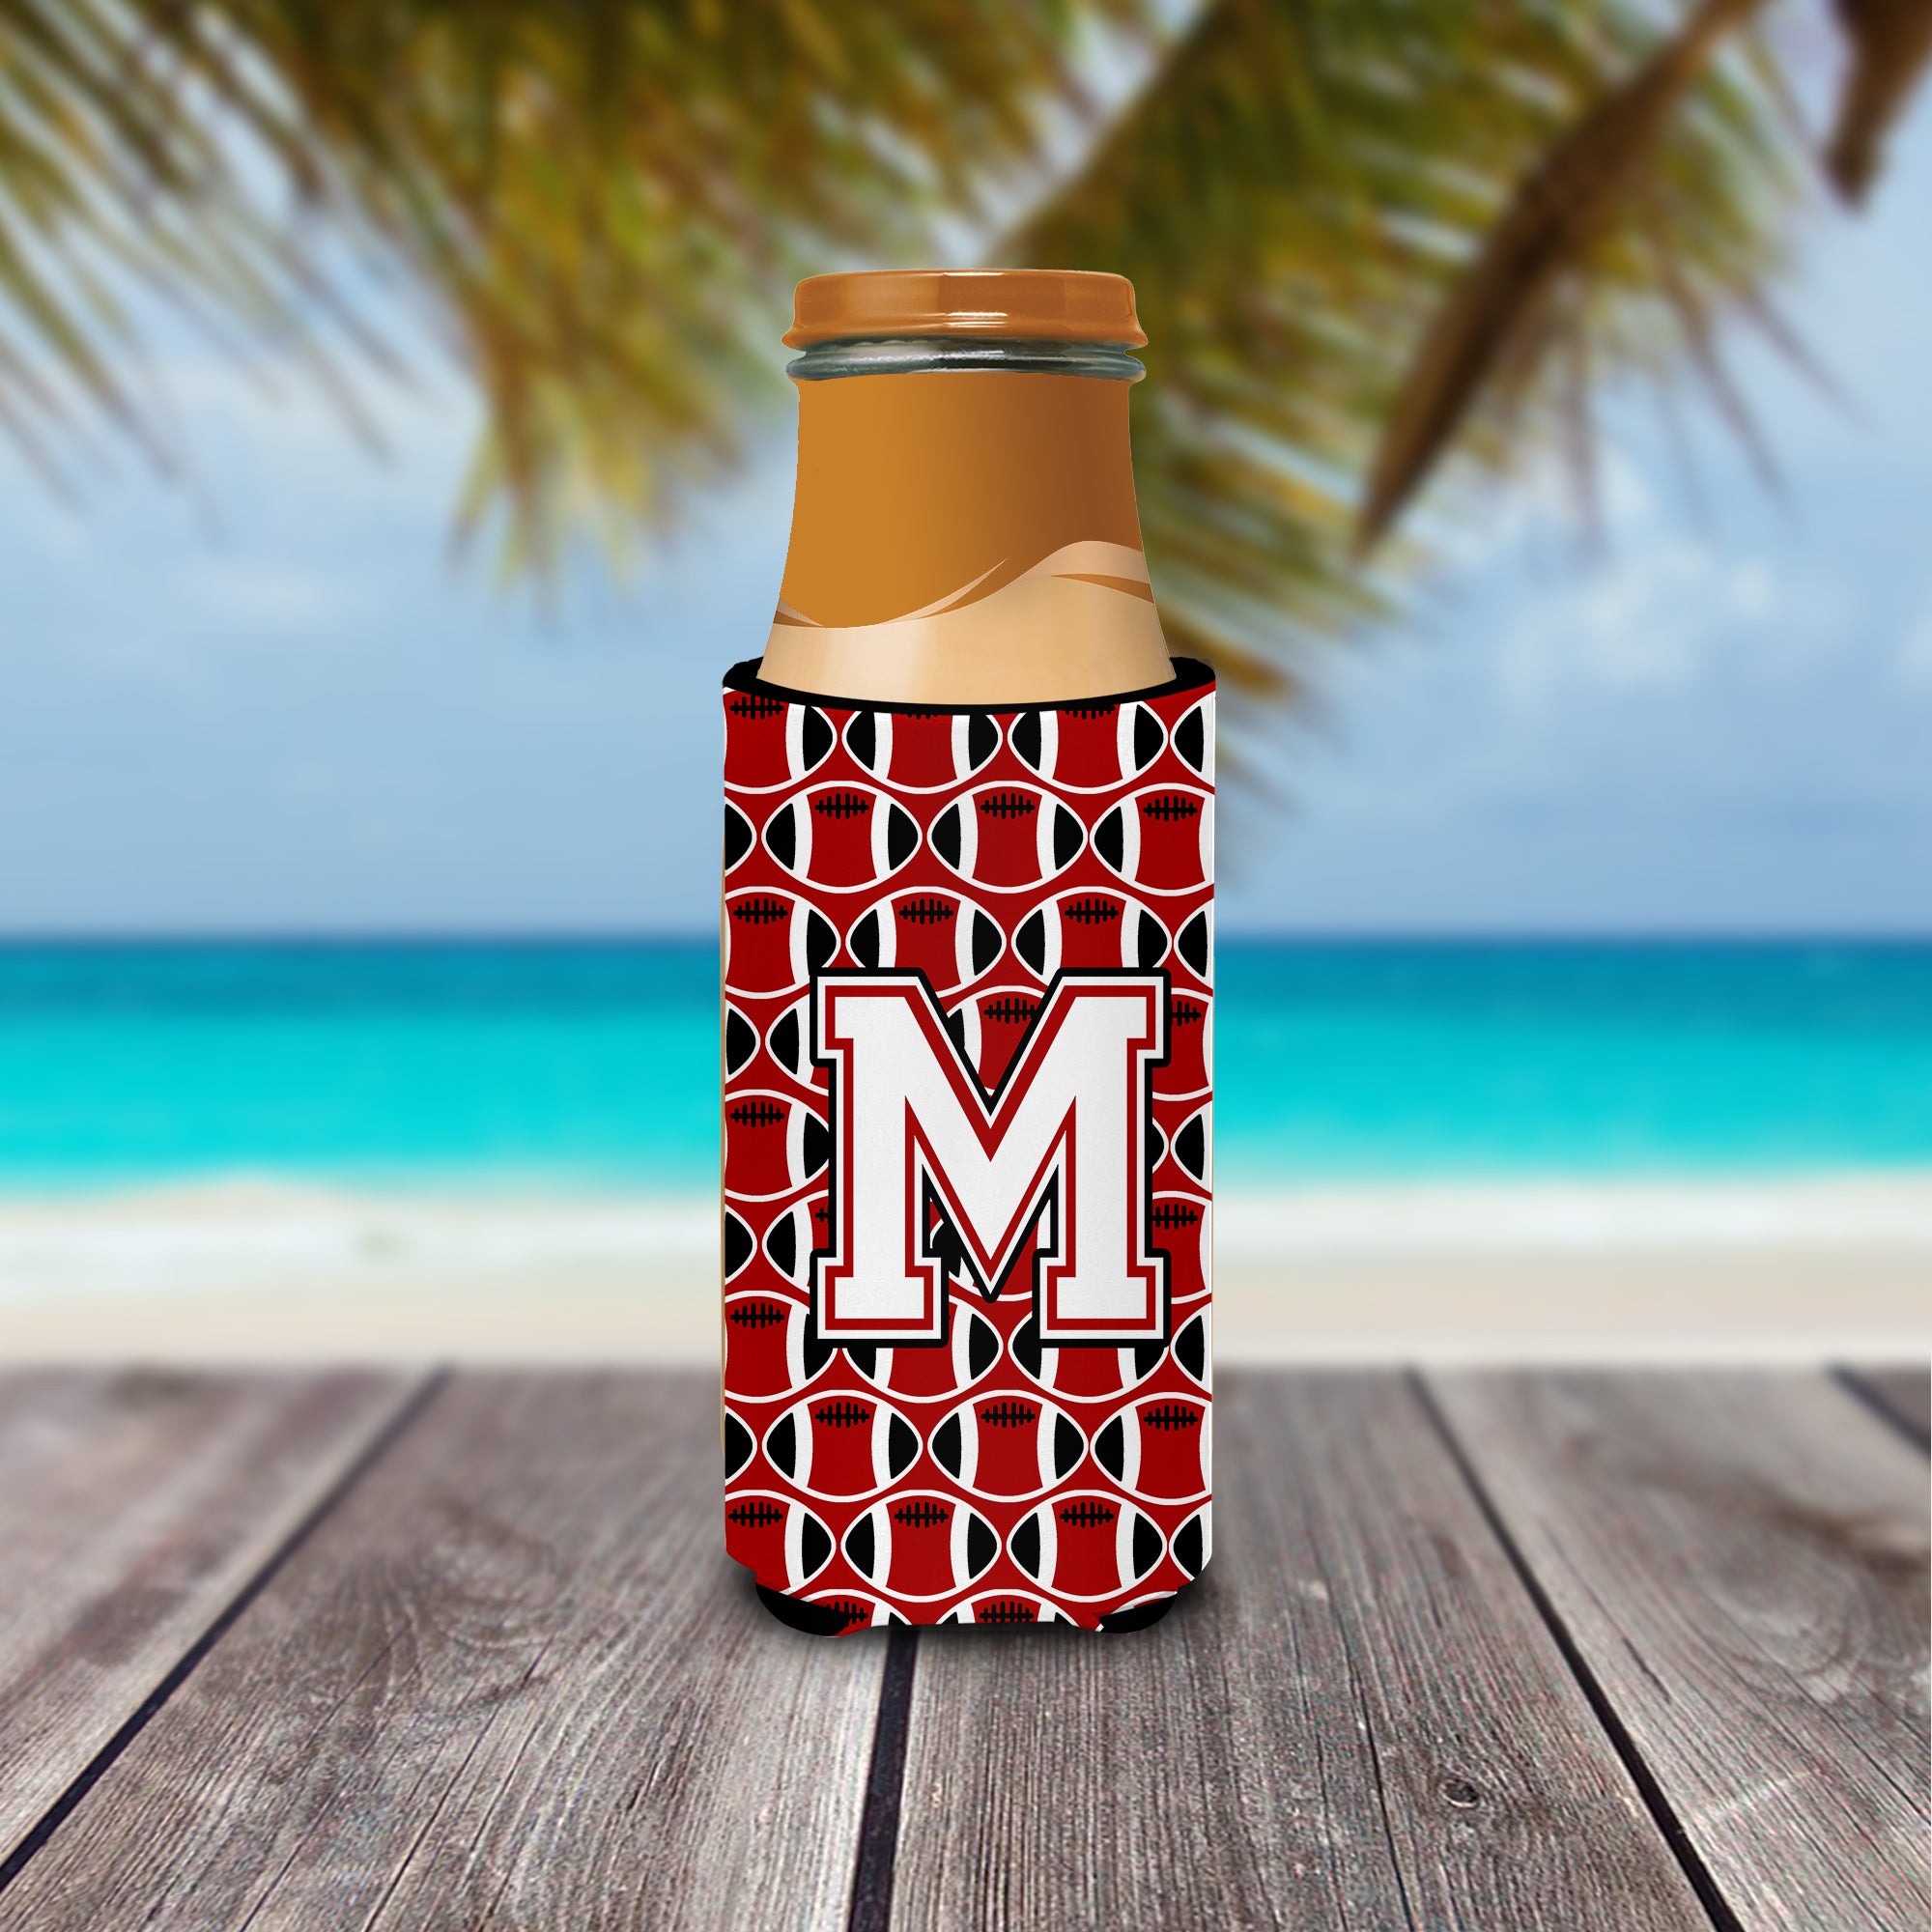 Letter M Football Cardinal and White Ultra Beverage Insulators for slim cans CJ1082-MMUK.